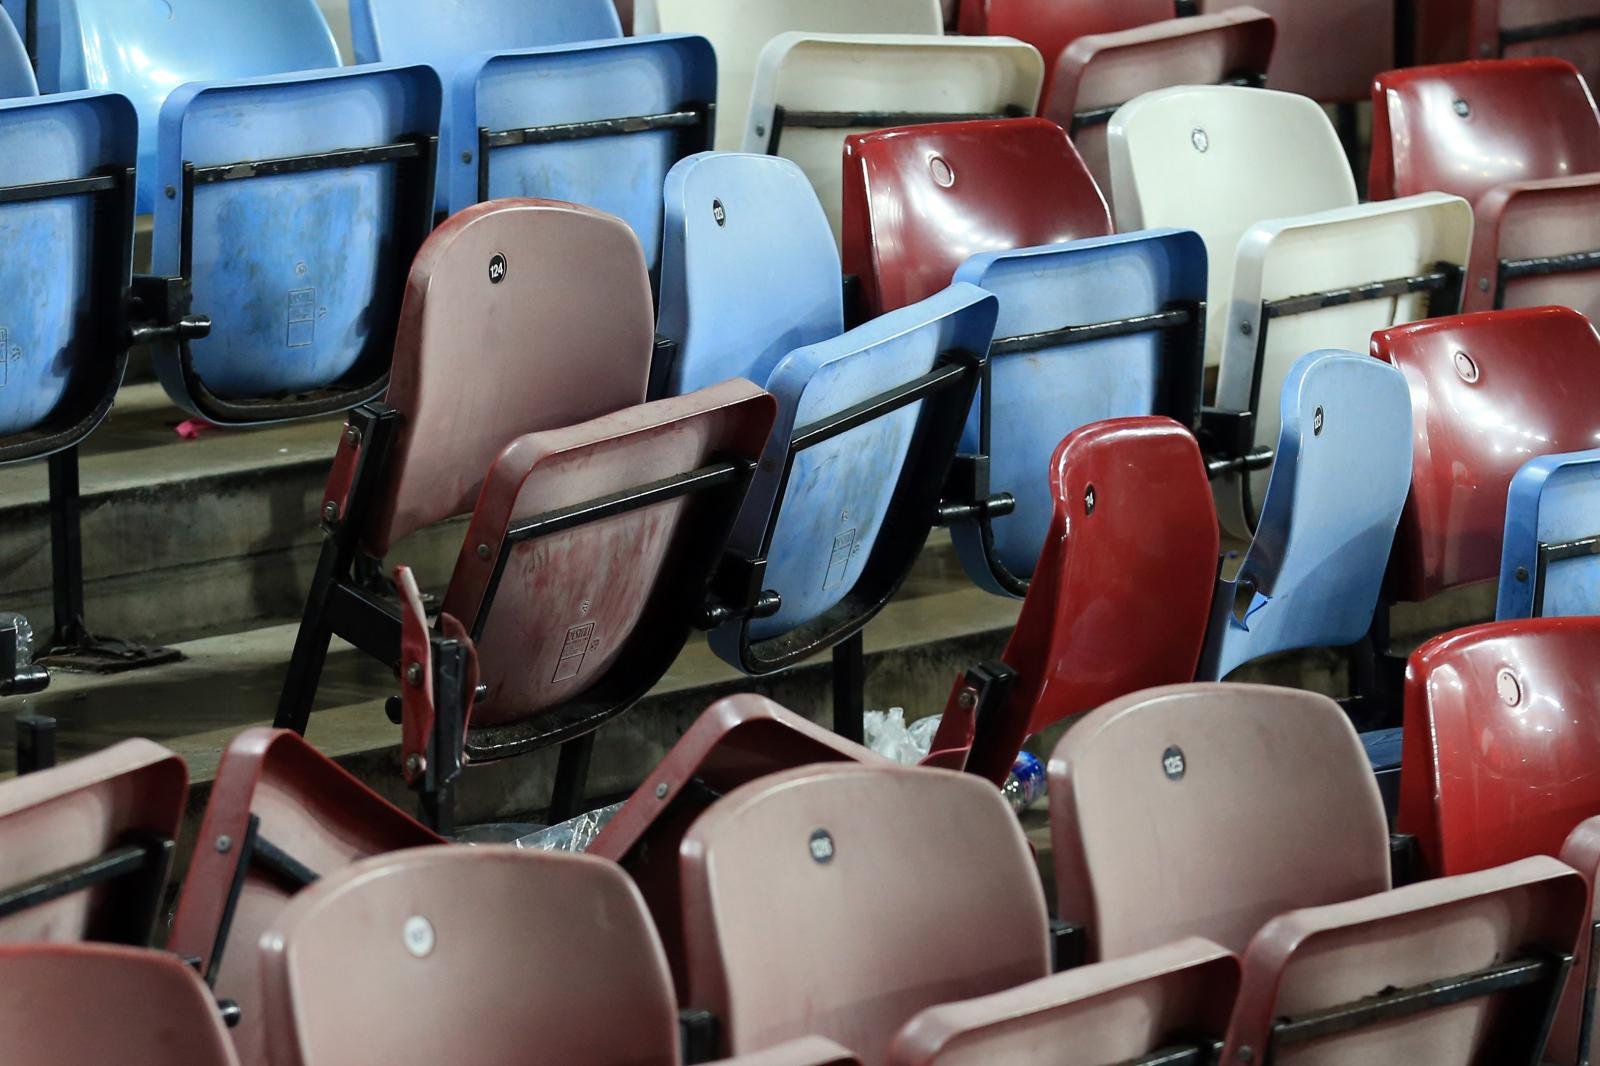 West Ham fans react as Upton Park era finally comes to an end